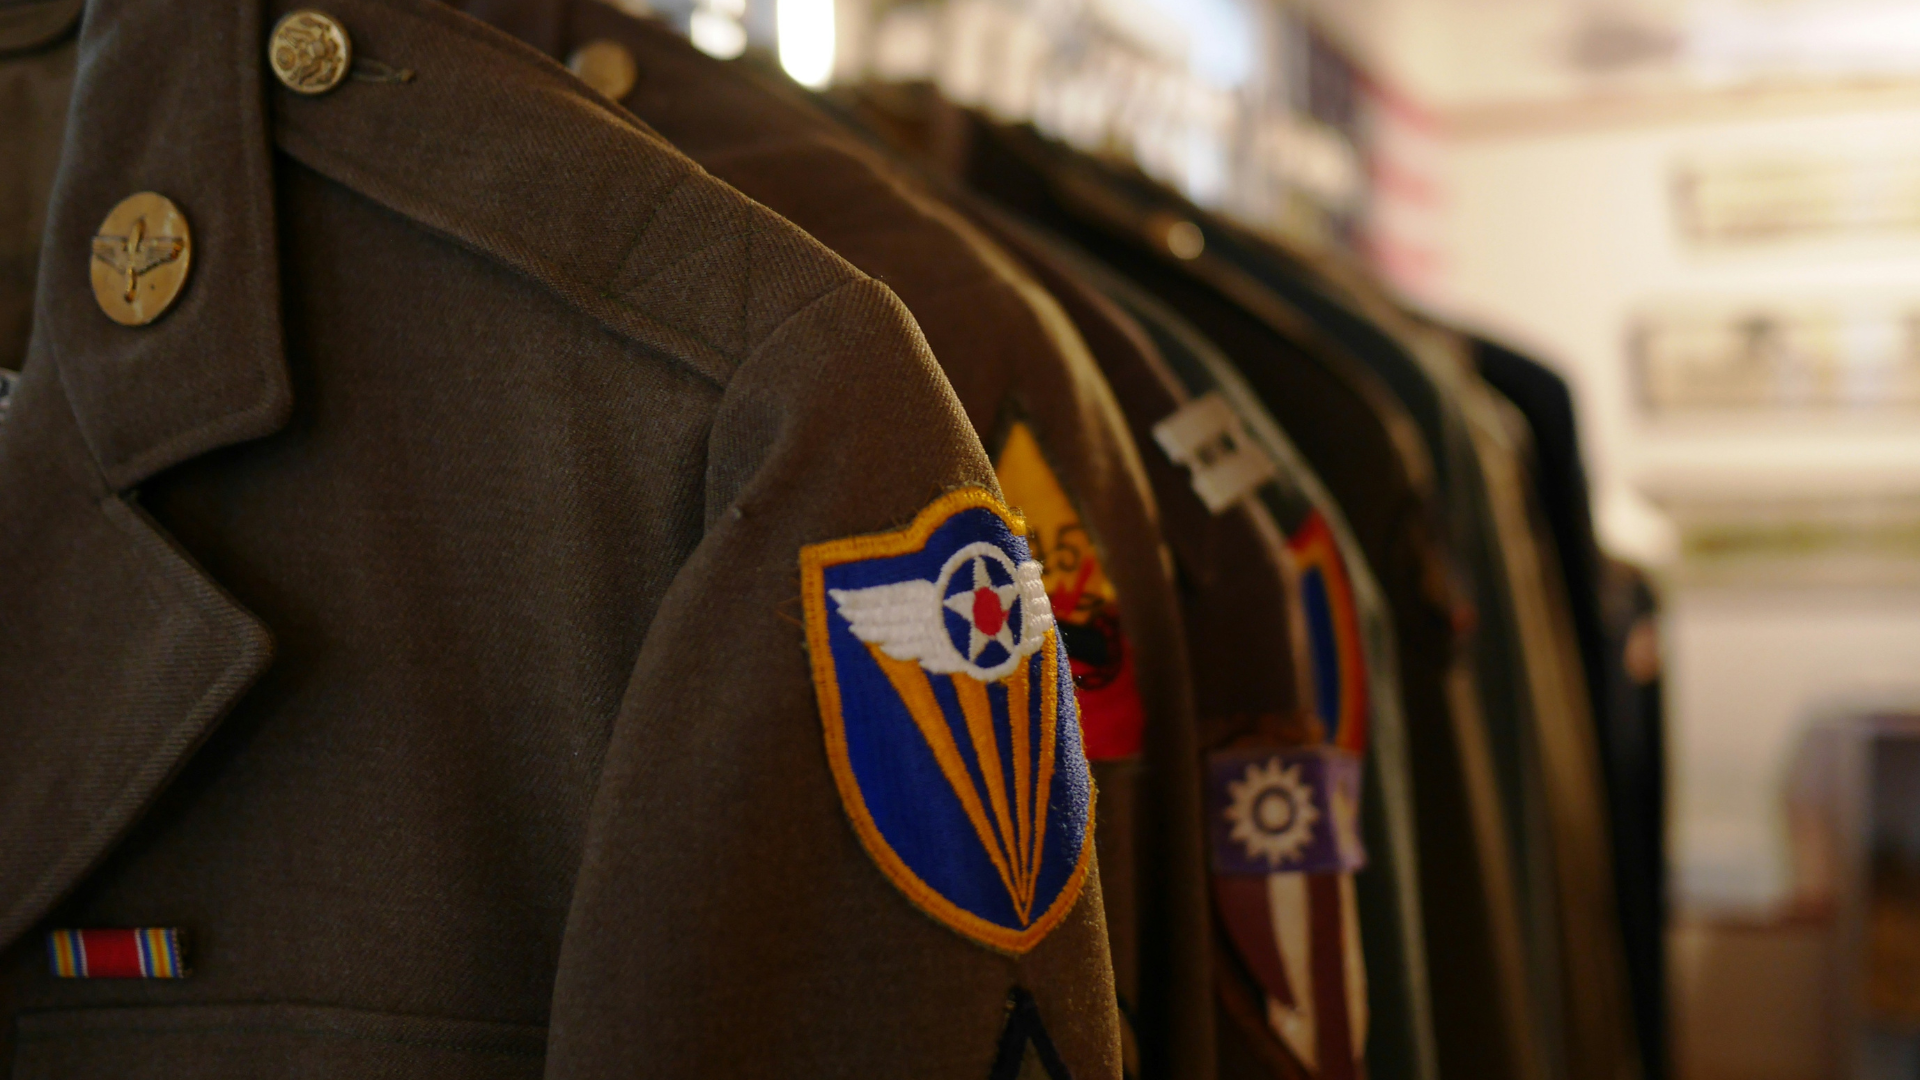 Military uniforms hung up in a row